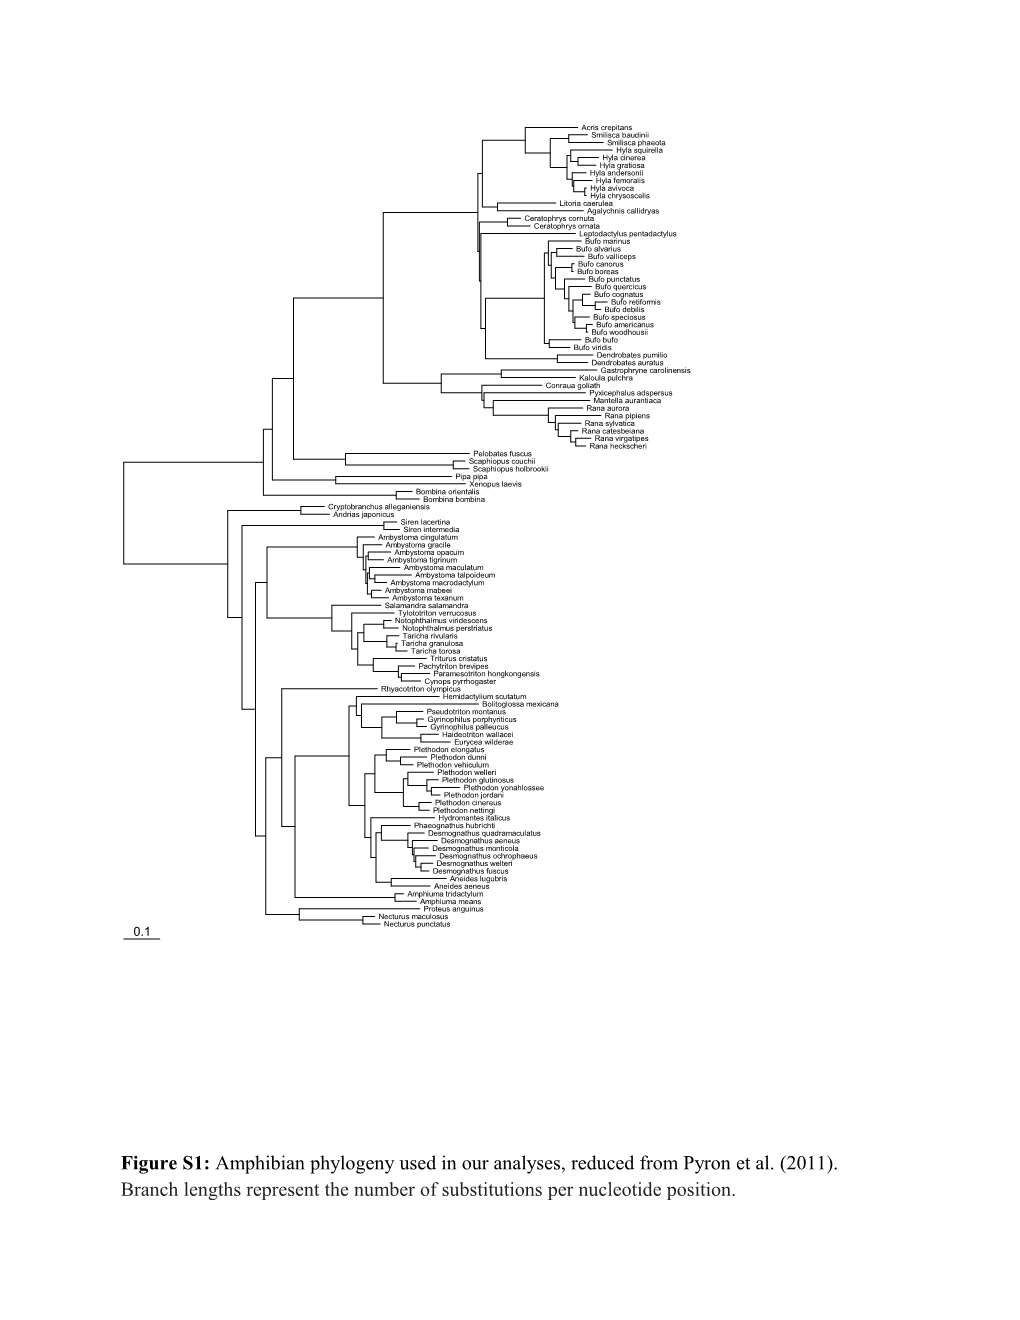 Figure S1: Amphibian Phylogeny Used in Our Analyses, Reduced from Pyron Et Al. (2011)